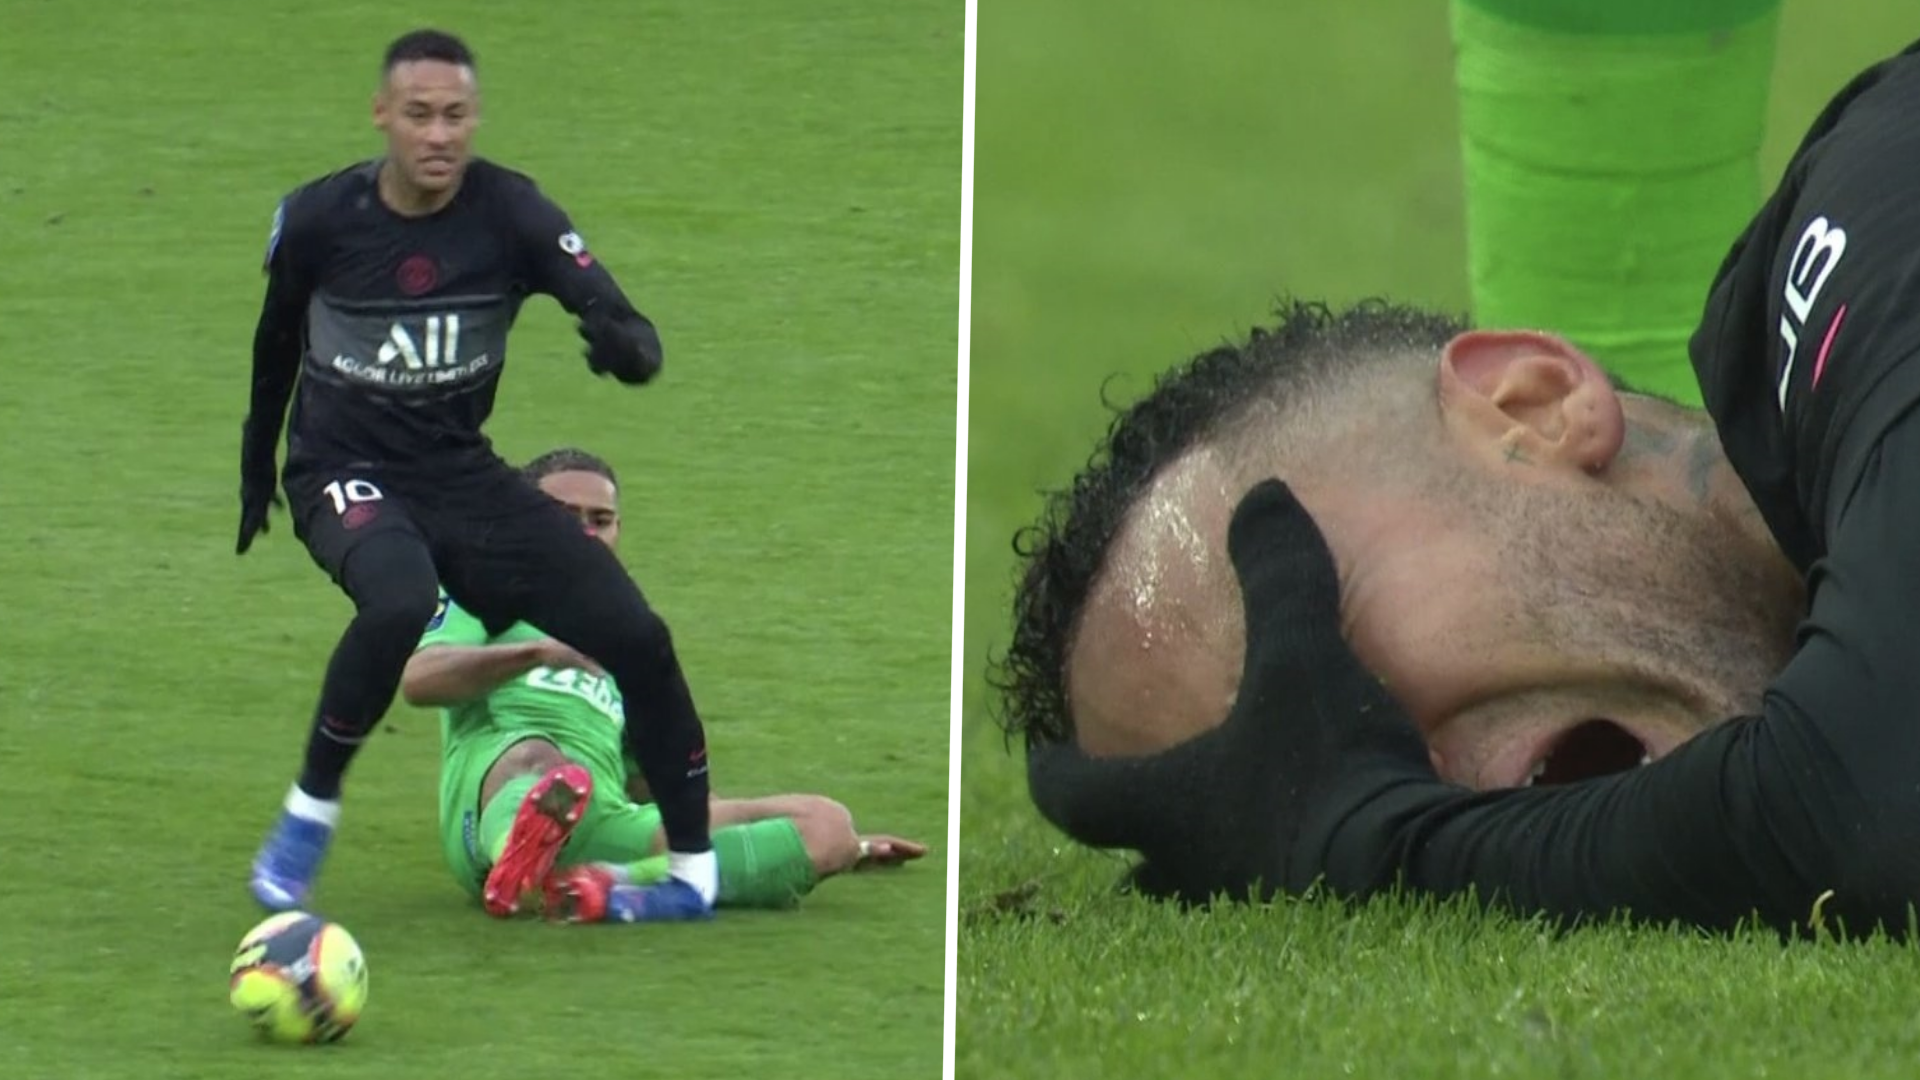 Neymar to miss up to eight weeks at PSG with ankle injury which left him screaming in agony